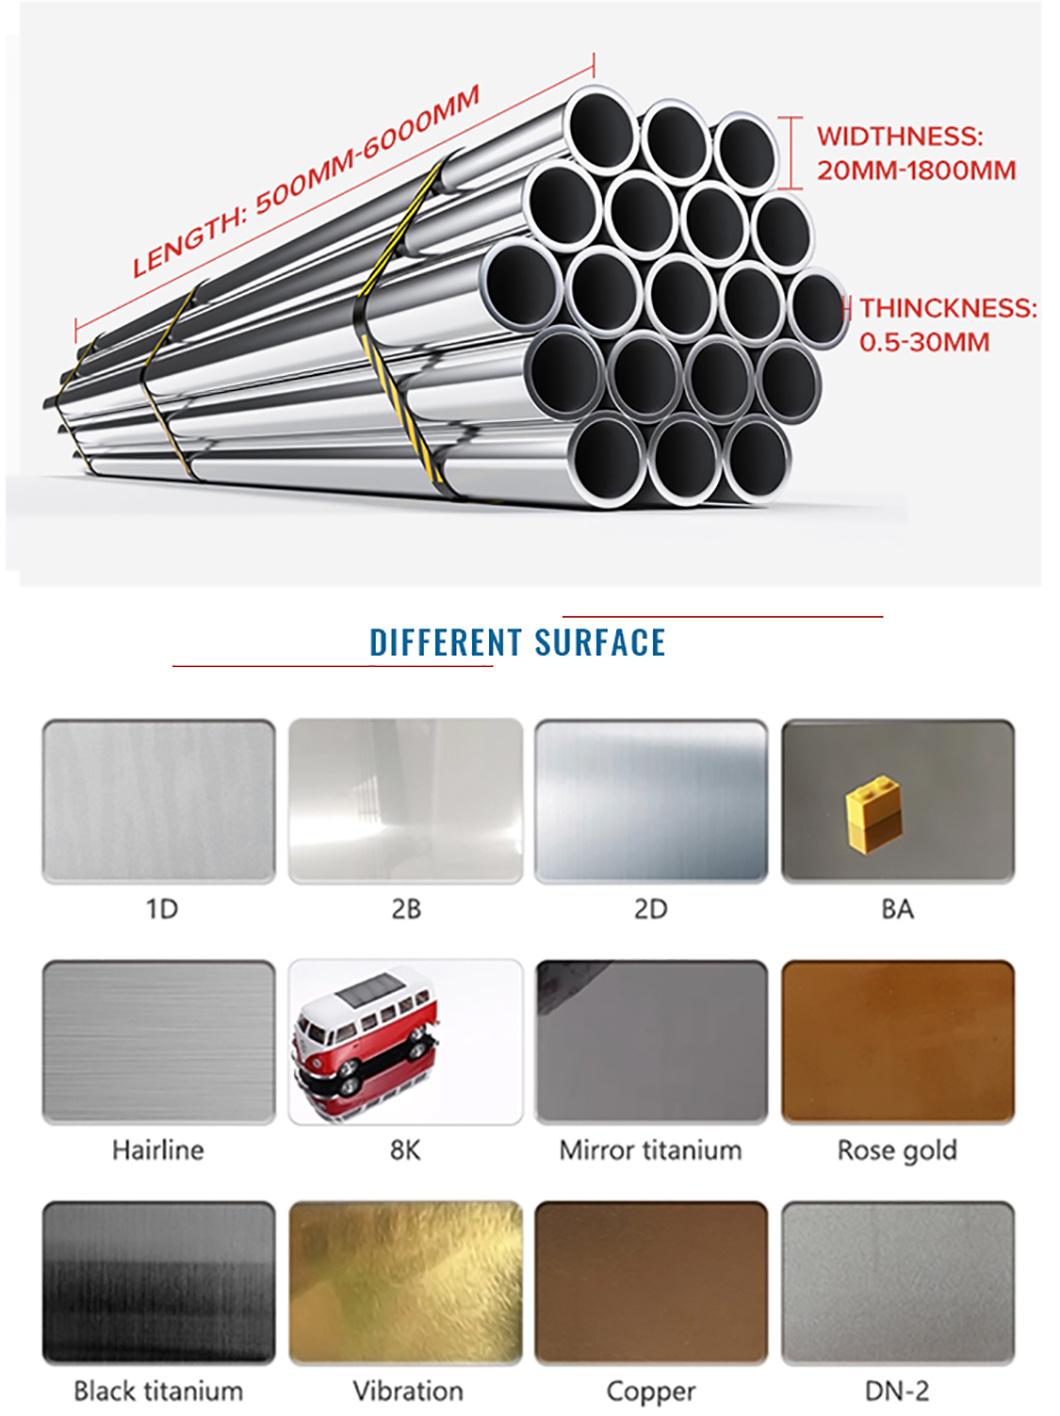 Rectangle Square Tube Harga Stainless Steel 304 Square Pipe